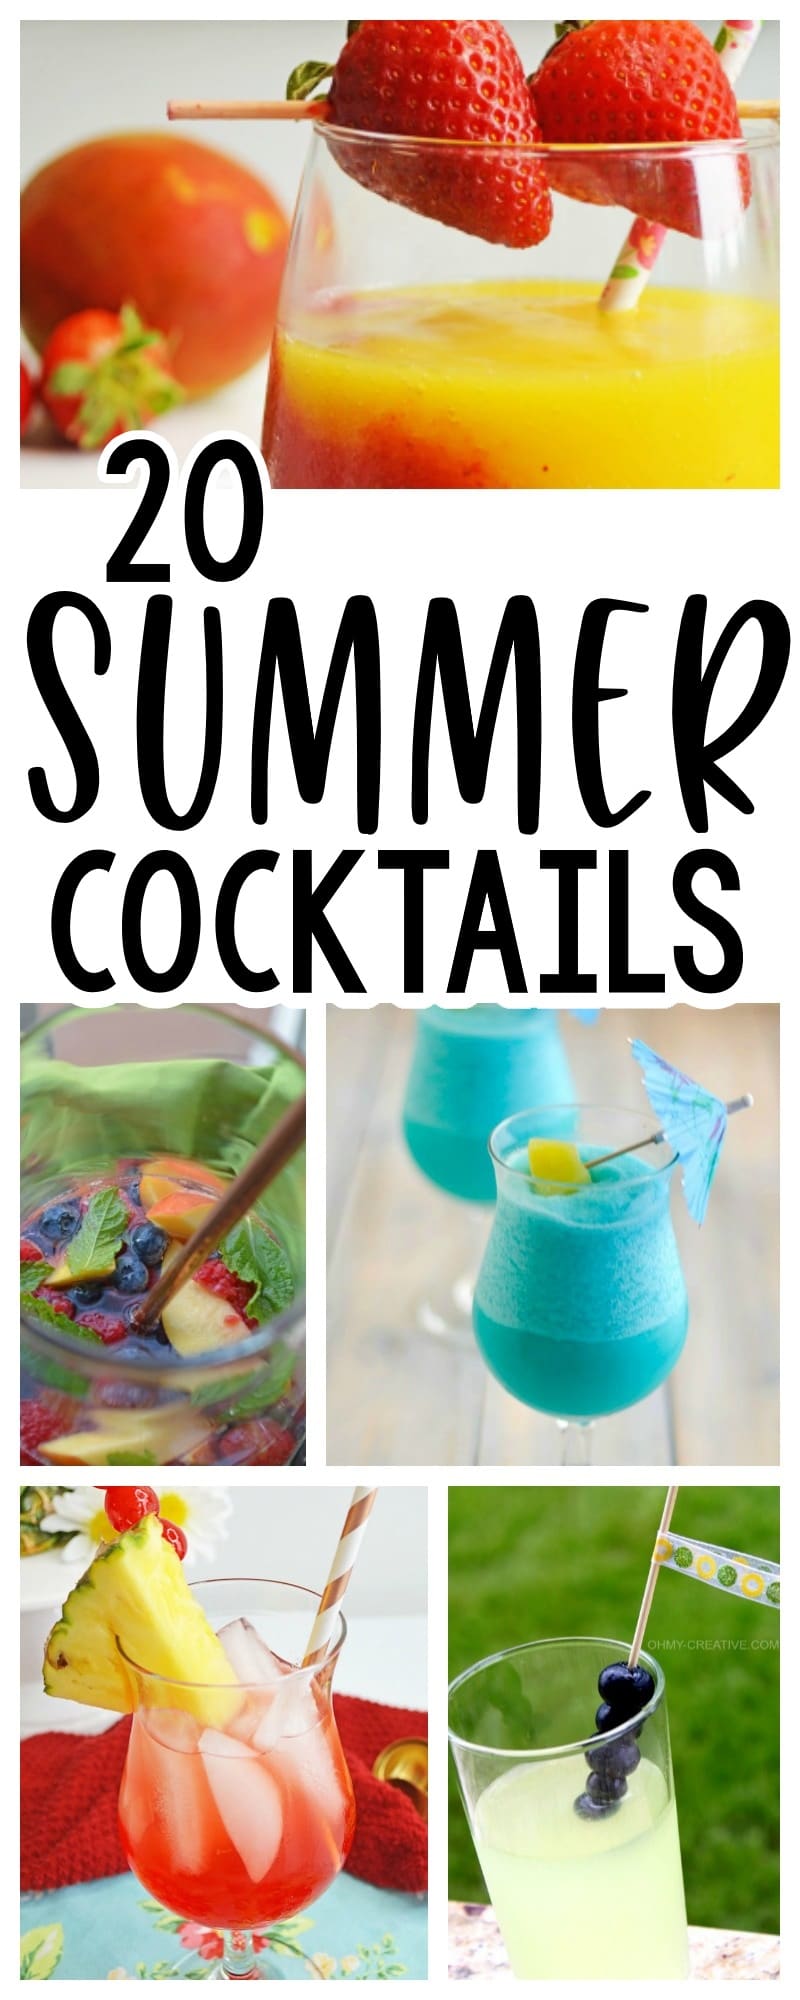 20 Summer cocktail recipes to help keep the party going all season long!